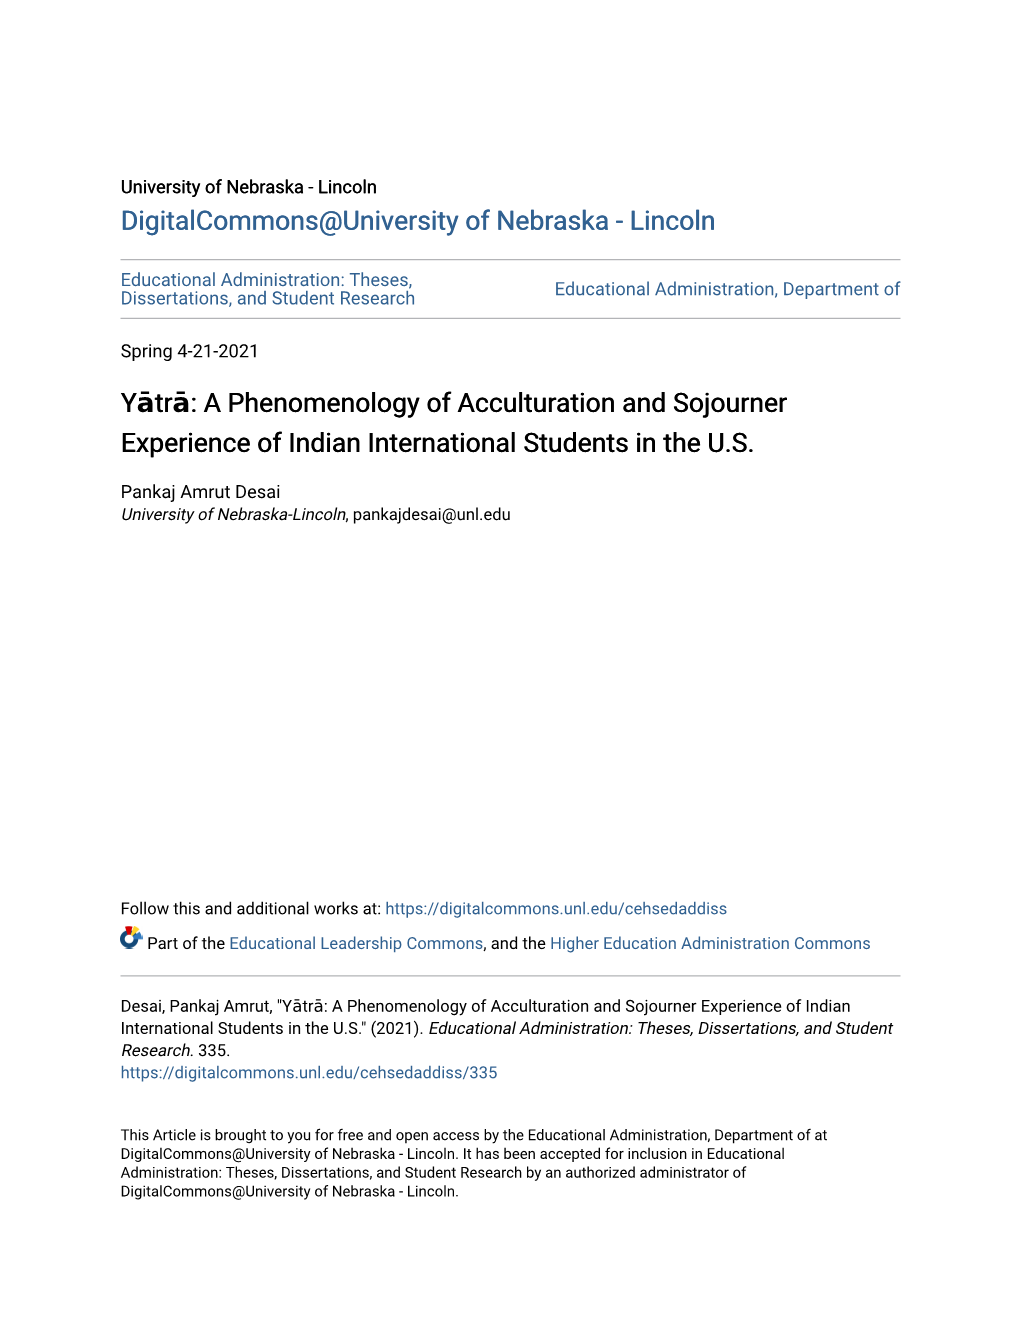 Yātrā: a Phenomenology of Acculturation and Sojourner Experience of Indian International Students in the U.S